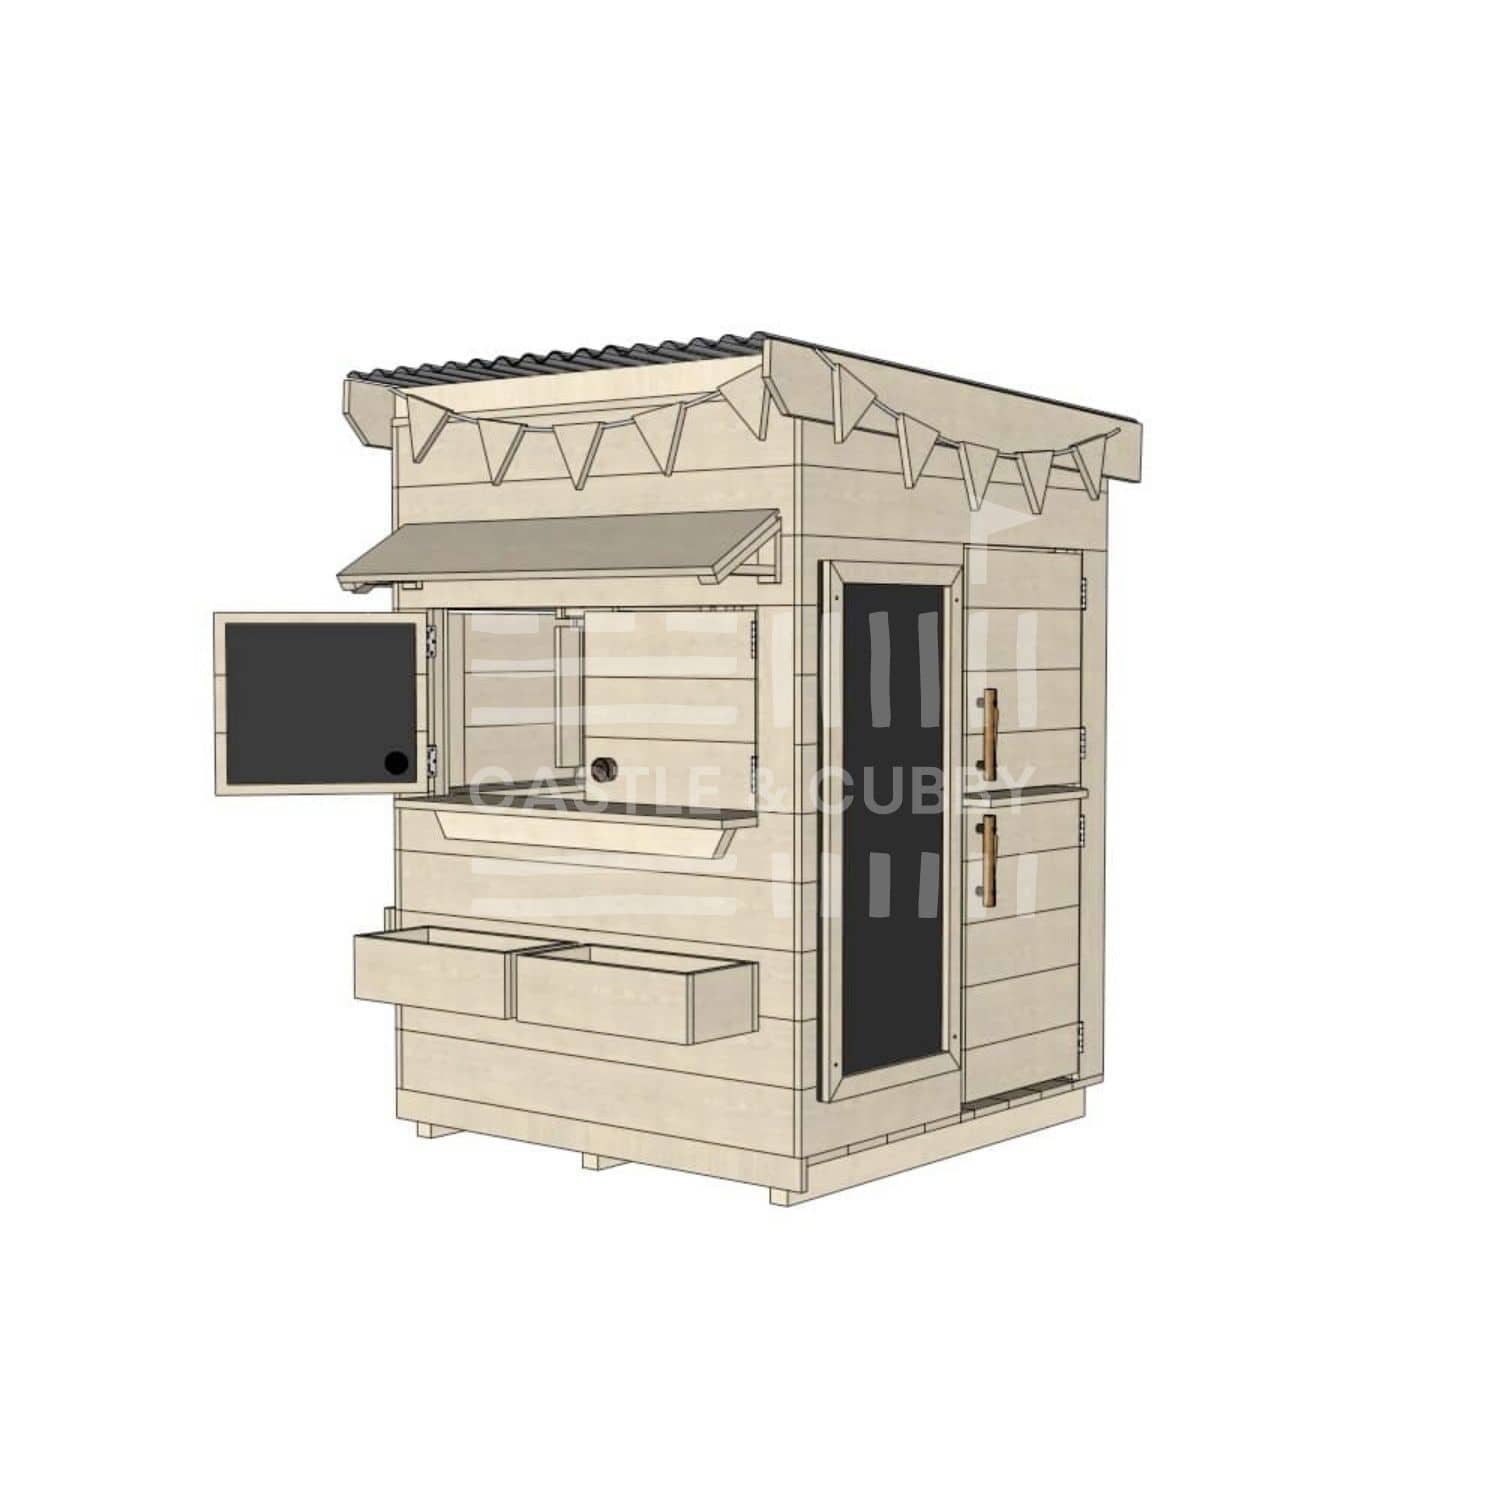 Flat roof raw pine timber cubby house domestic little square size with accessories